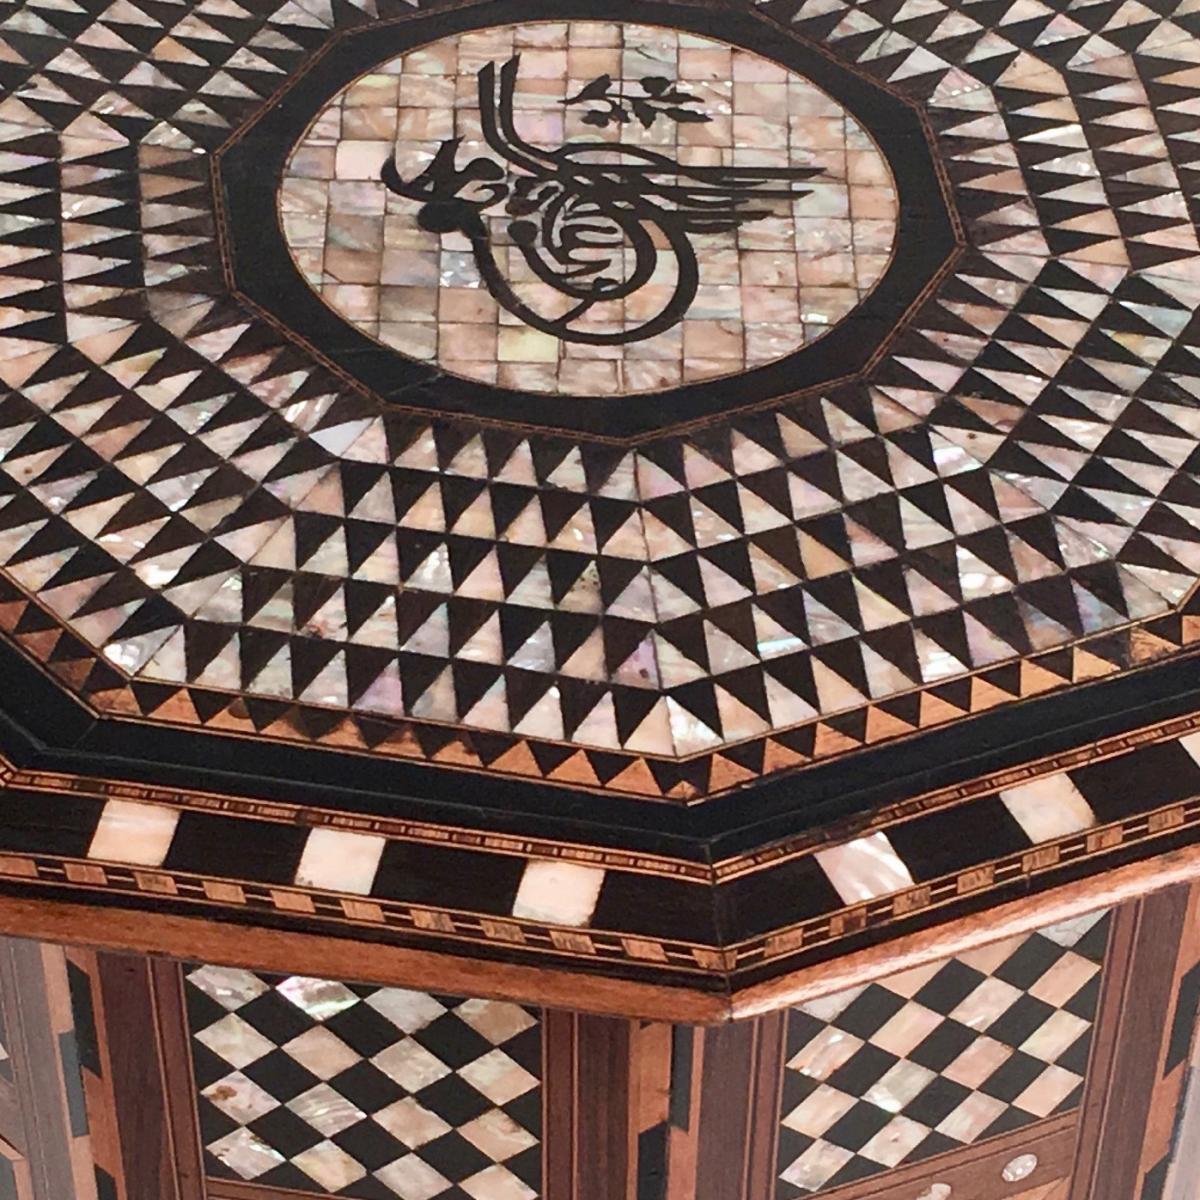 19th century Ottoman mother of pearl inlaid walnut table